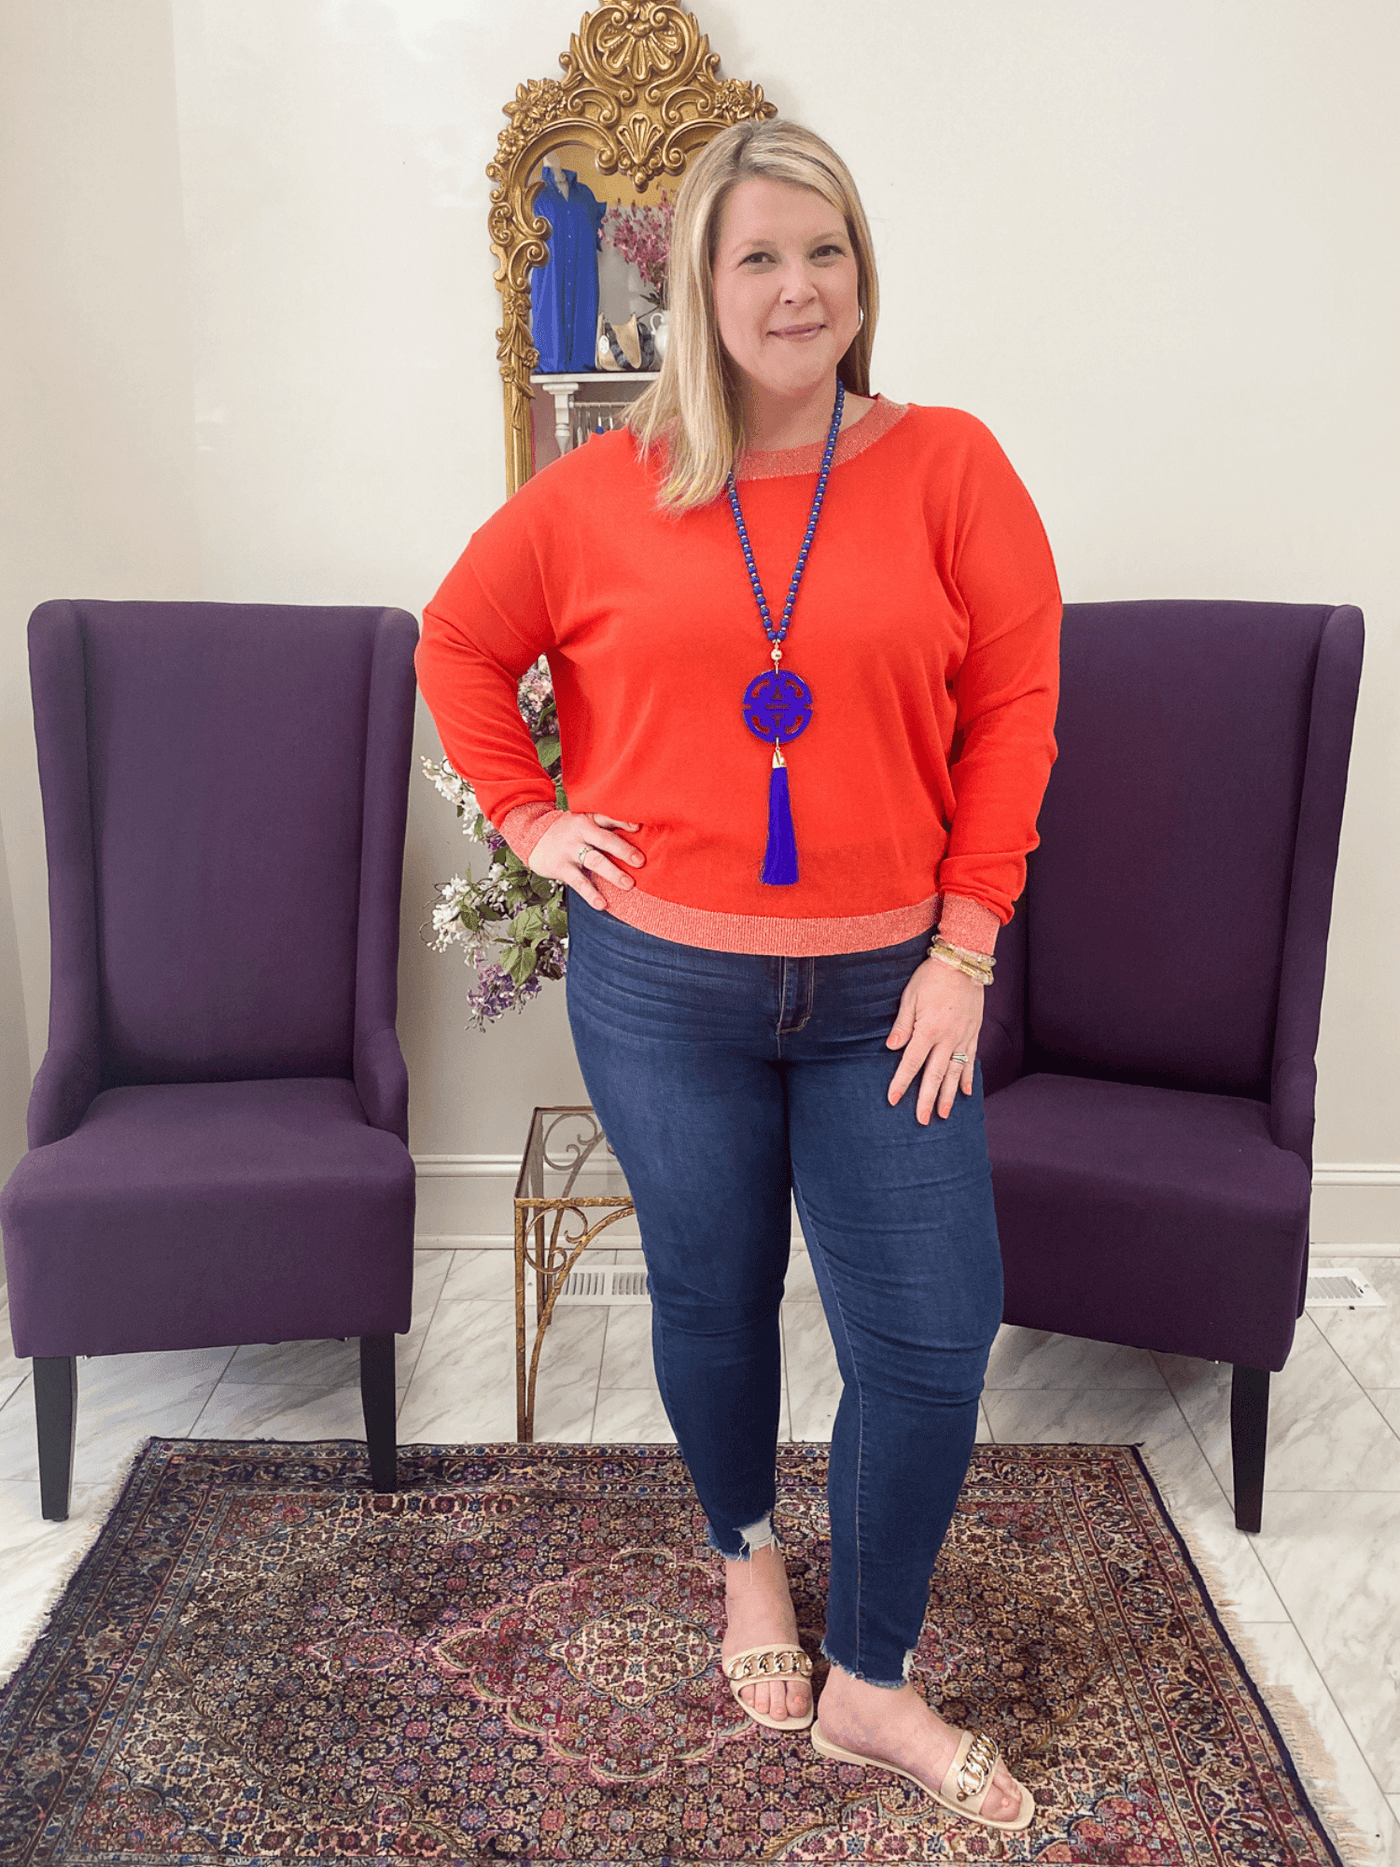  red-orange sweater with gold sparkly detailed hemlines on a curvy model